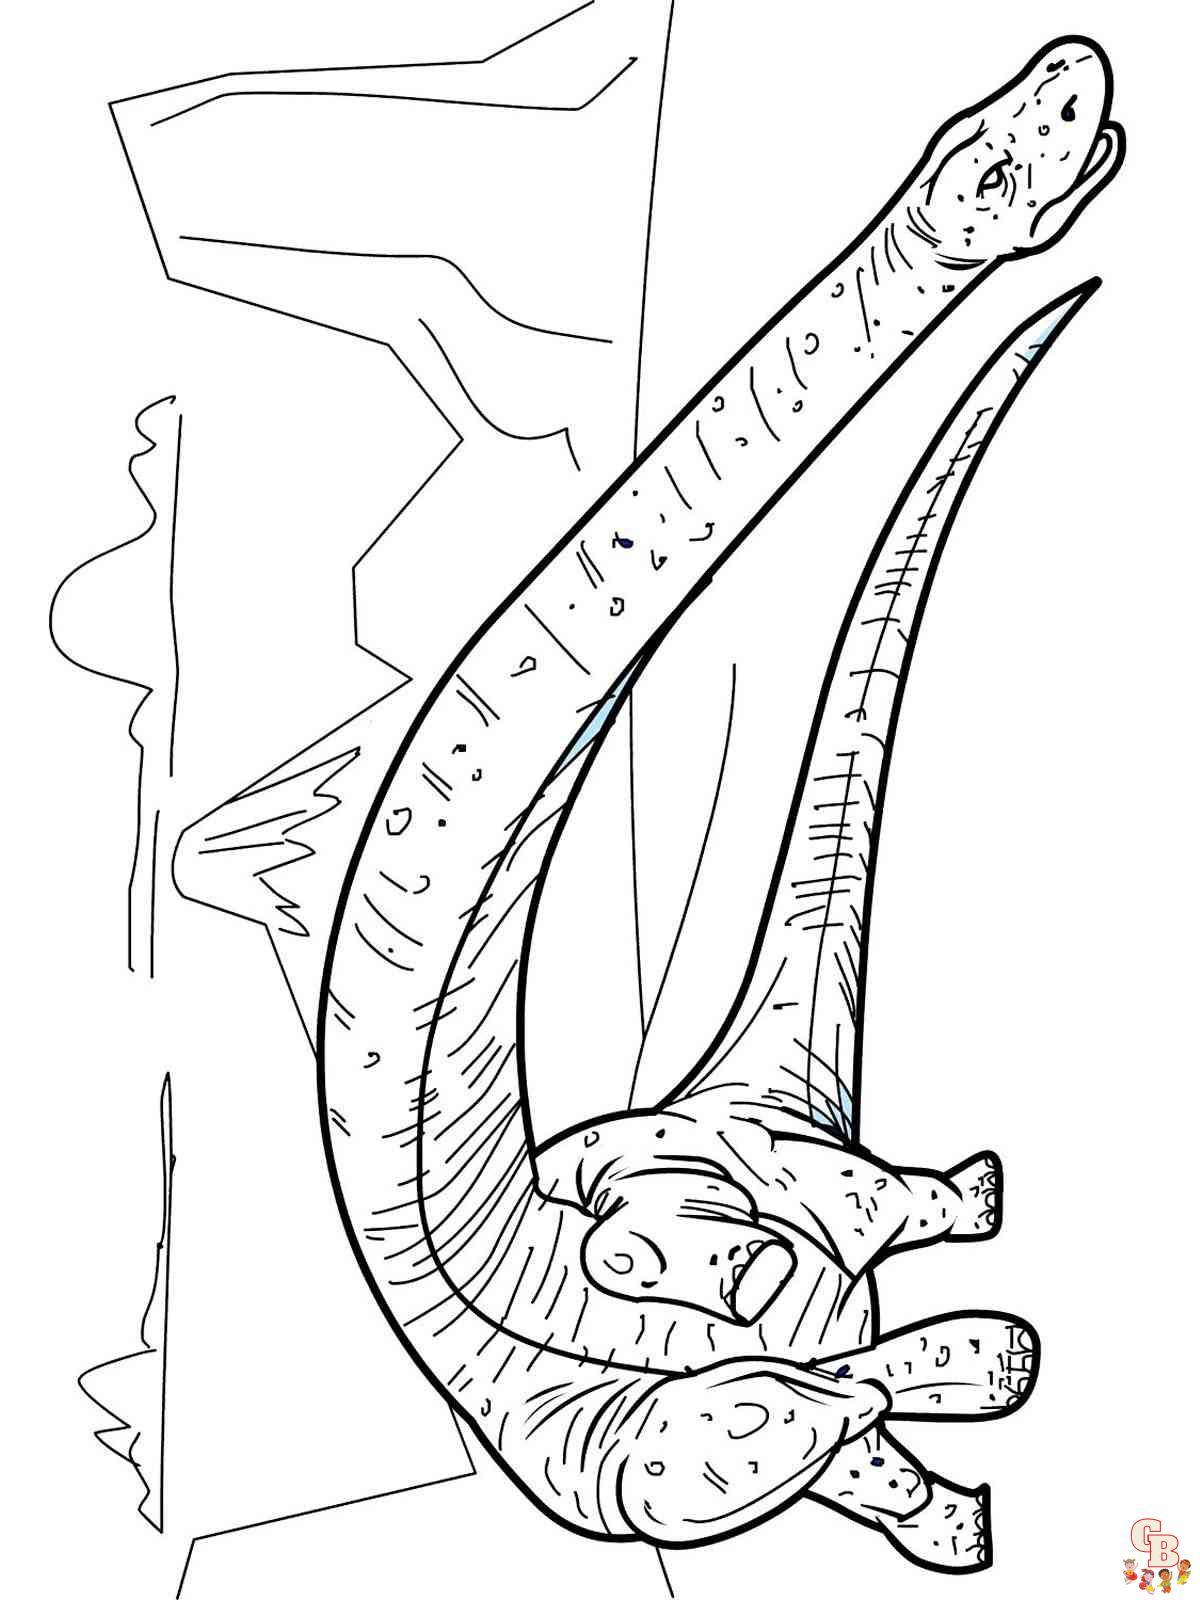 Brontosaurus Coloring Pages 6